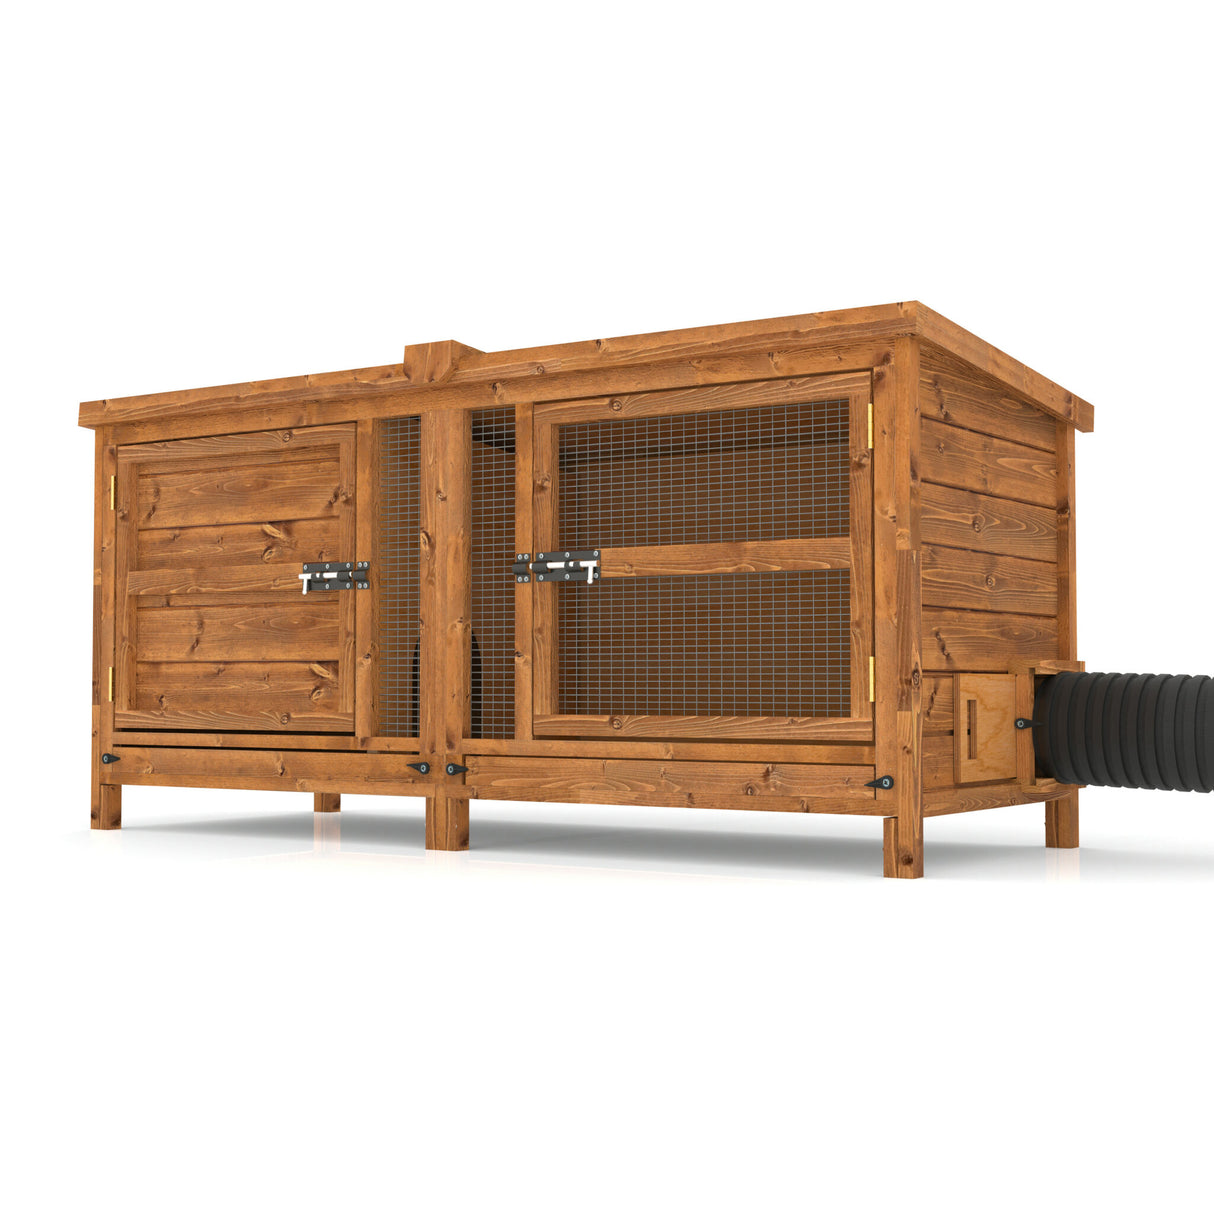 5ft Chartwell Single Luxury Rabbit Hutch | Solid & Sturdy Design With Plenty Of Room To Rest And Play